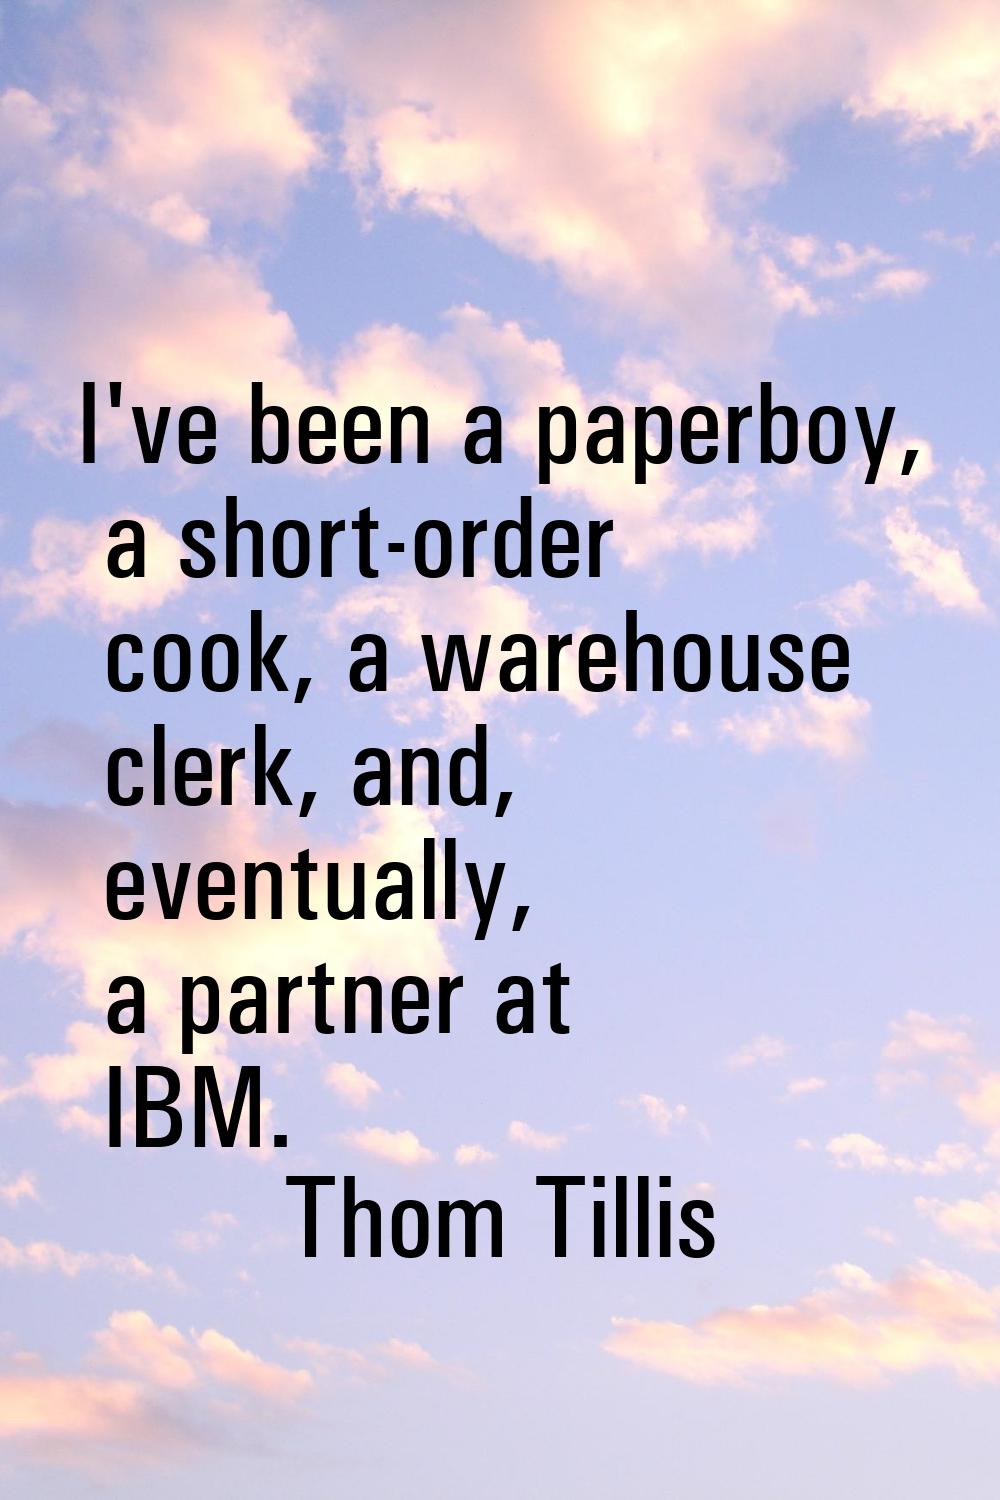 I've been a paperboy, a short-order cook, a warehouse clerk, and, eventually, a partner at IBM.